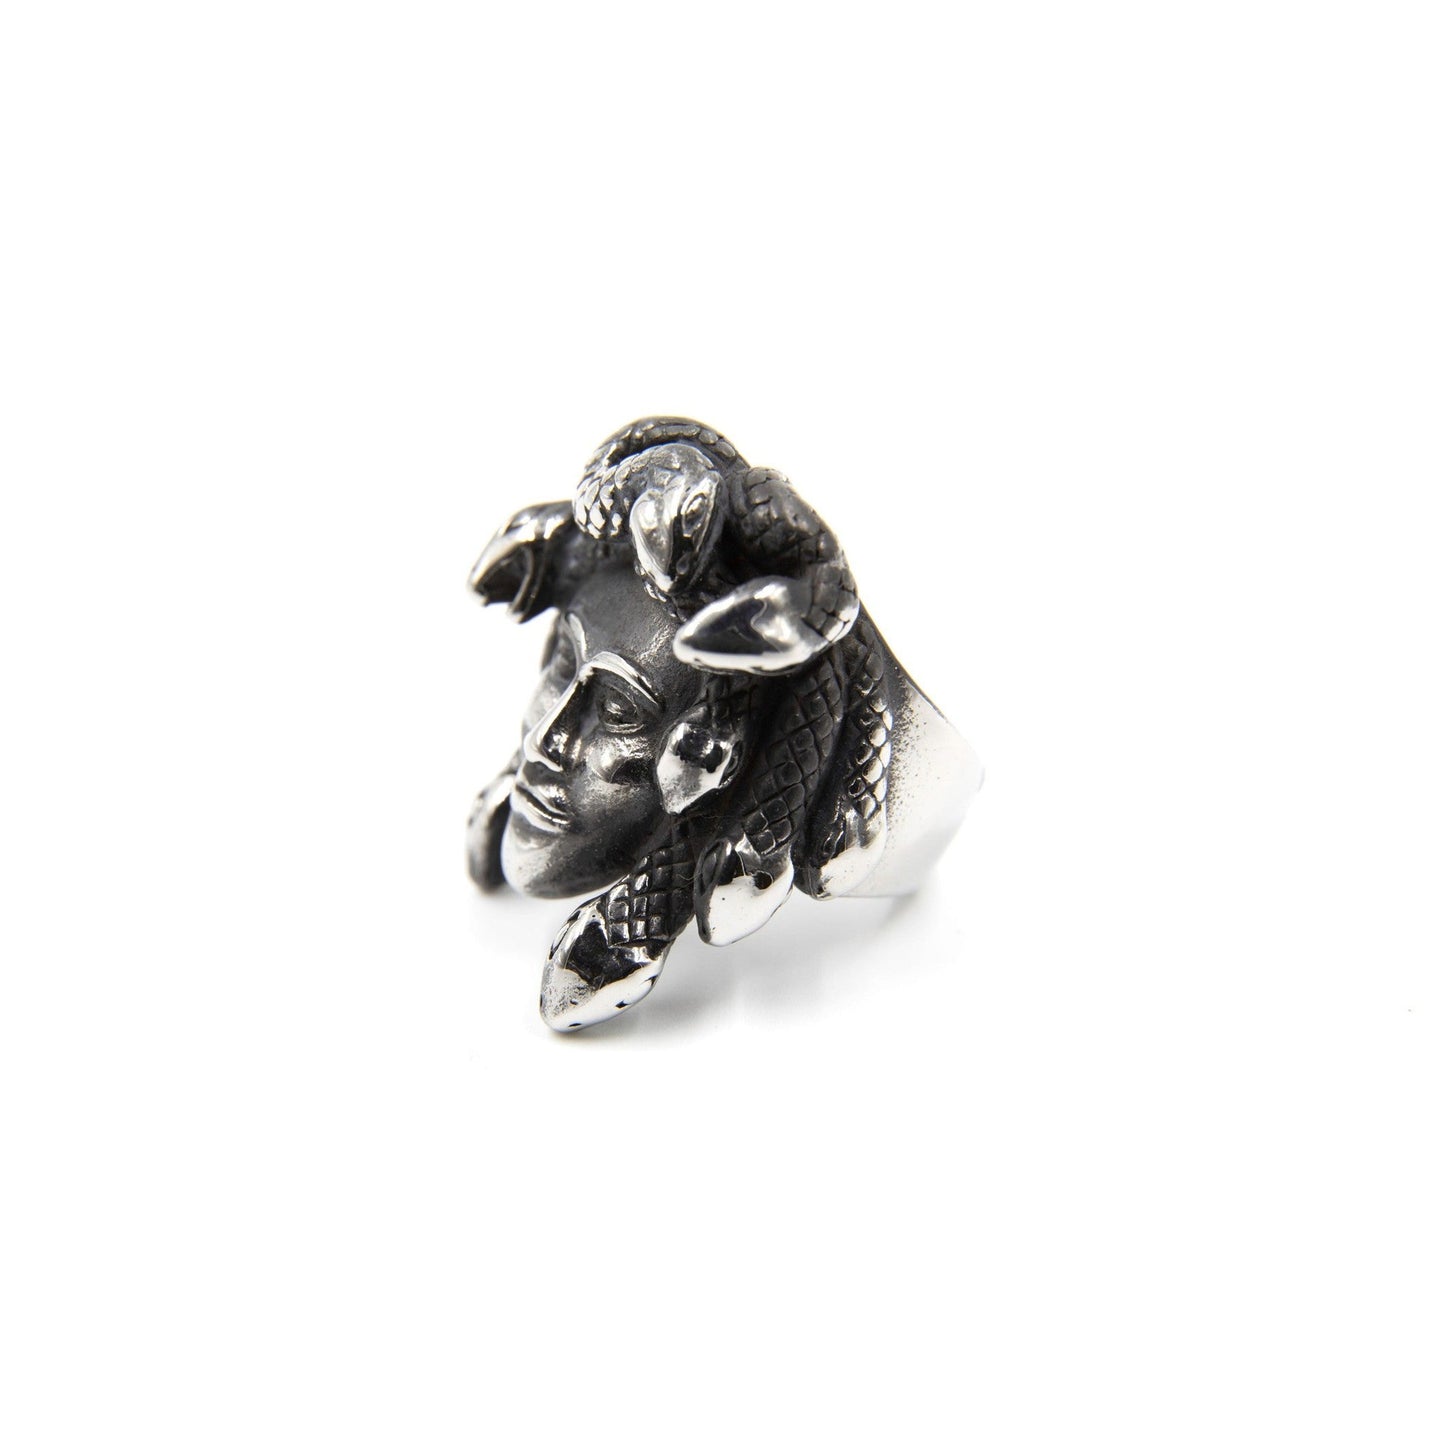 Medusa Statement Ring in Heritage Silver